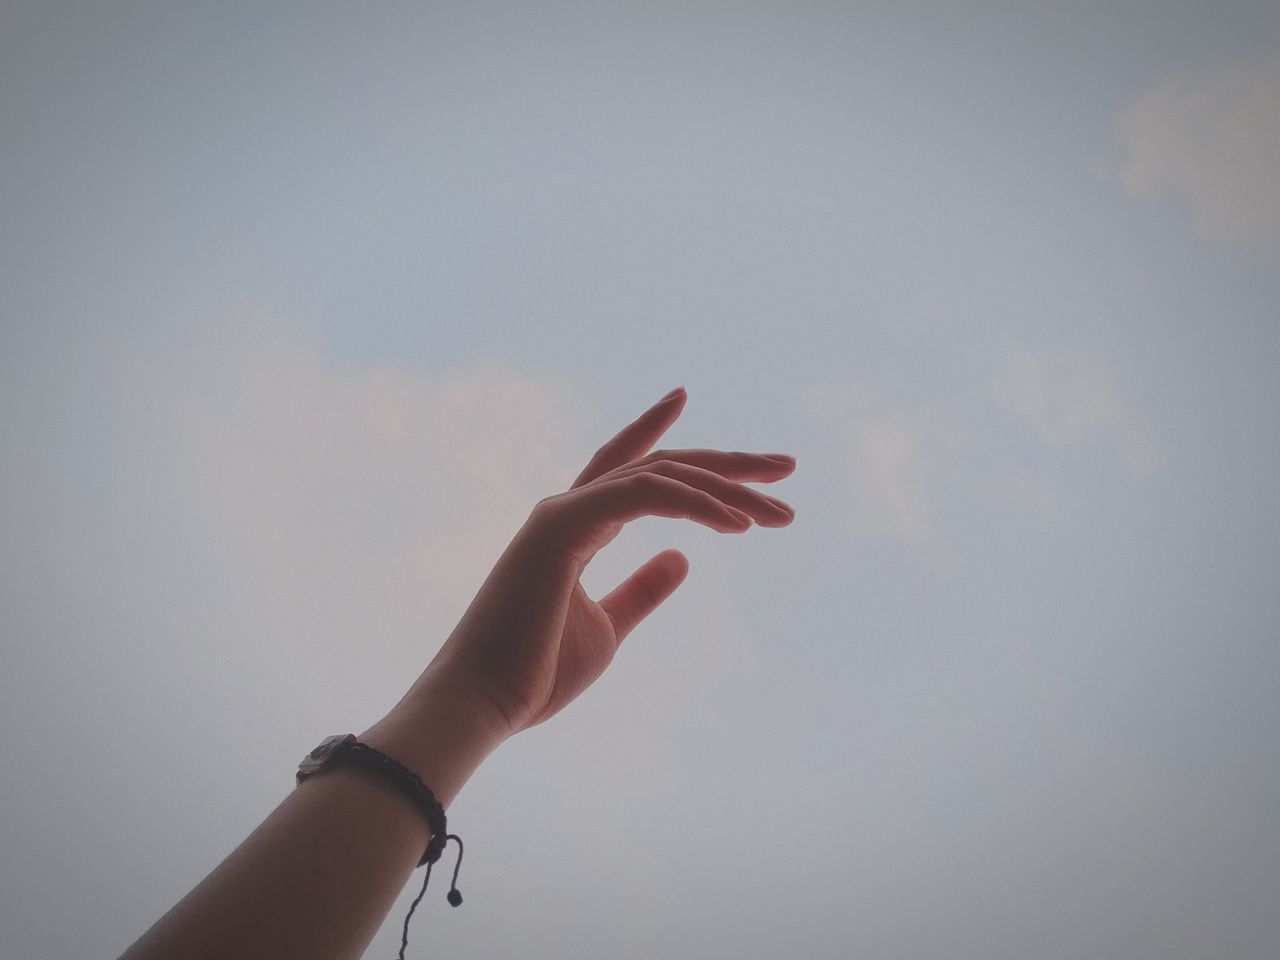 hand, one person, sky, finger, copy space, close-up, gesturing, adult, nature, women, arm, day